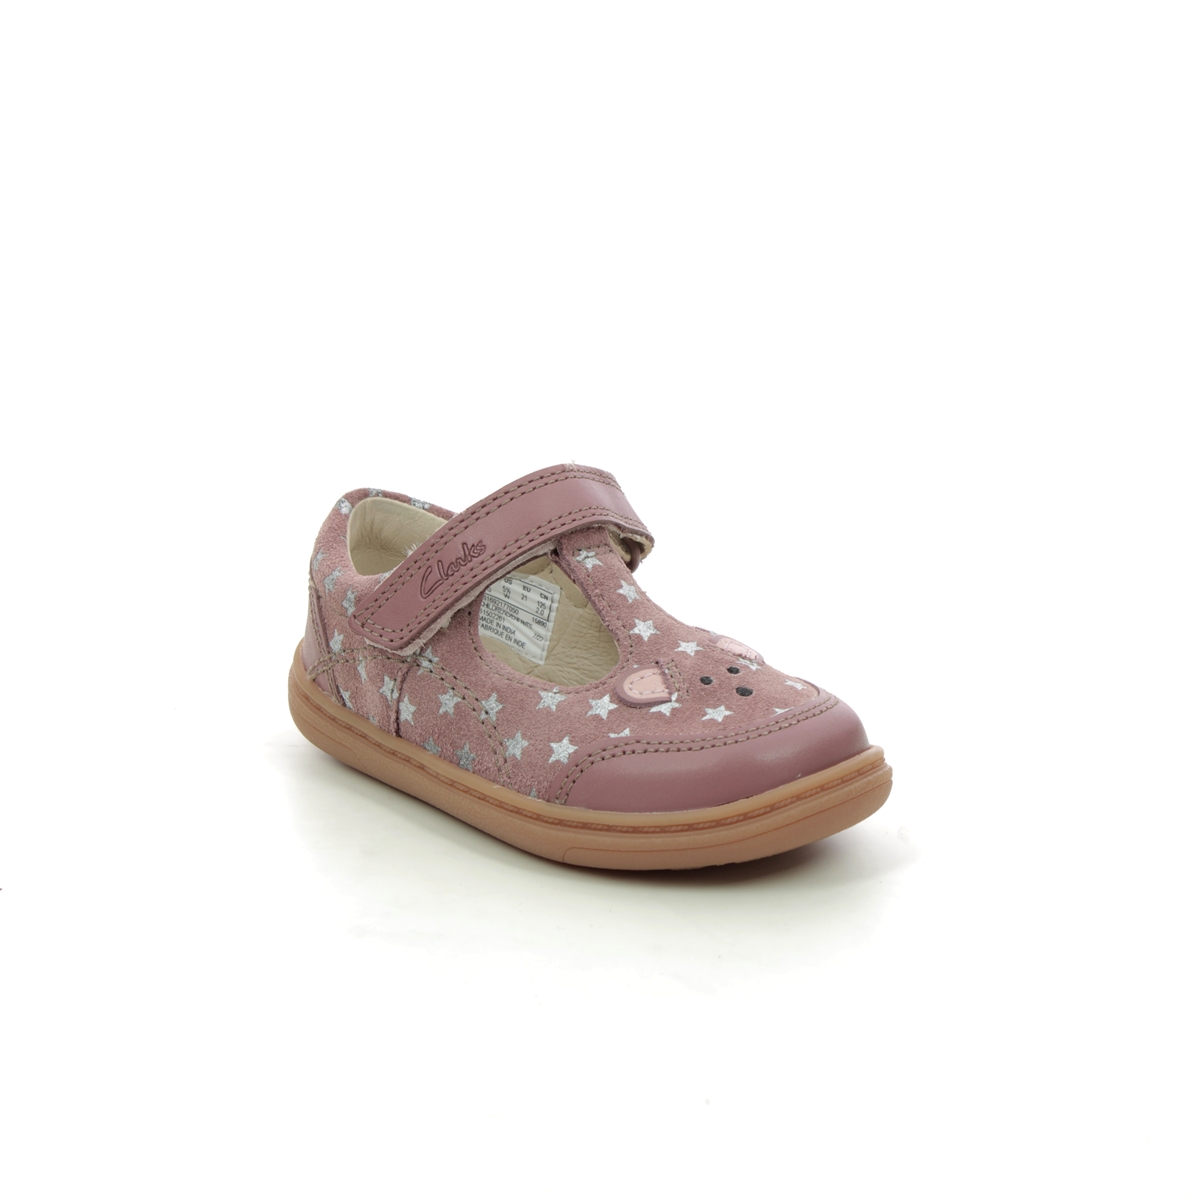 Clarks Flash Mouse T Pink Suede Kids First And Toddler 692177G In Size 6 In Plain Pink Suede G Width Fitting For kids